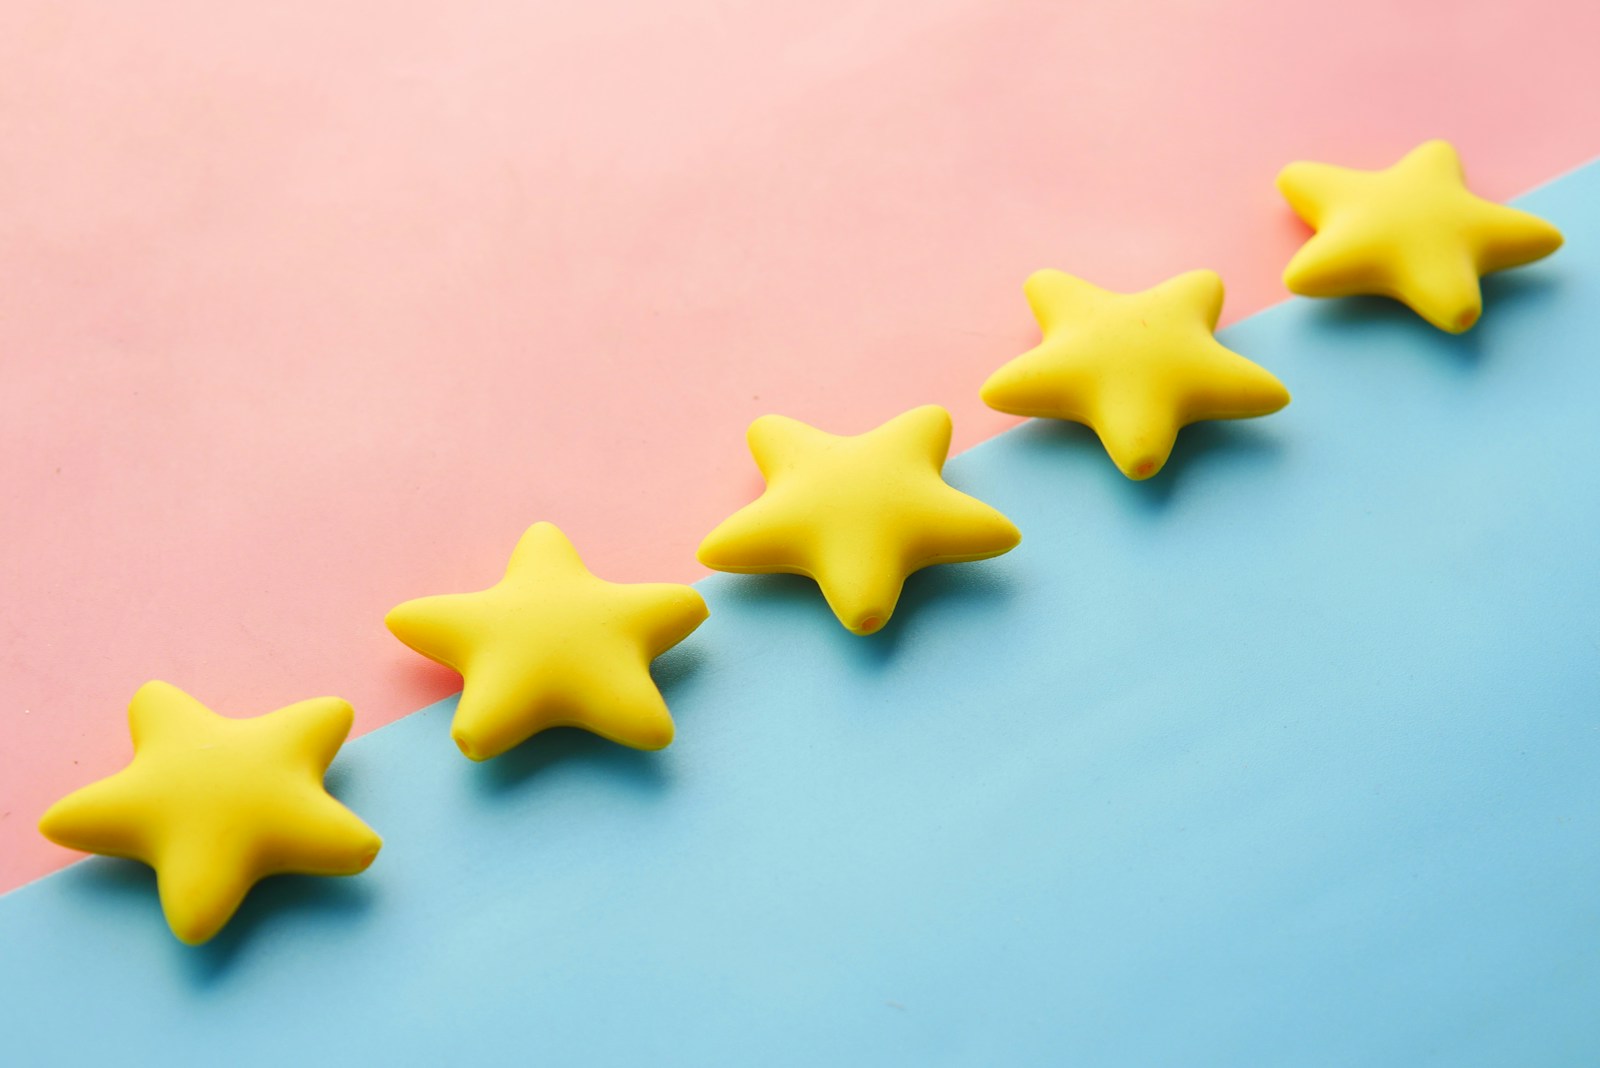 a row of 5 yellow stars sitting on top of a blue and pink surface